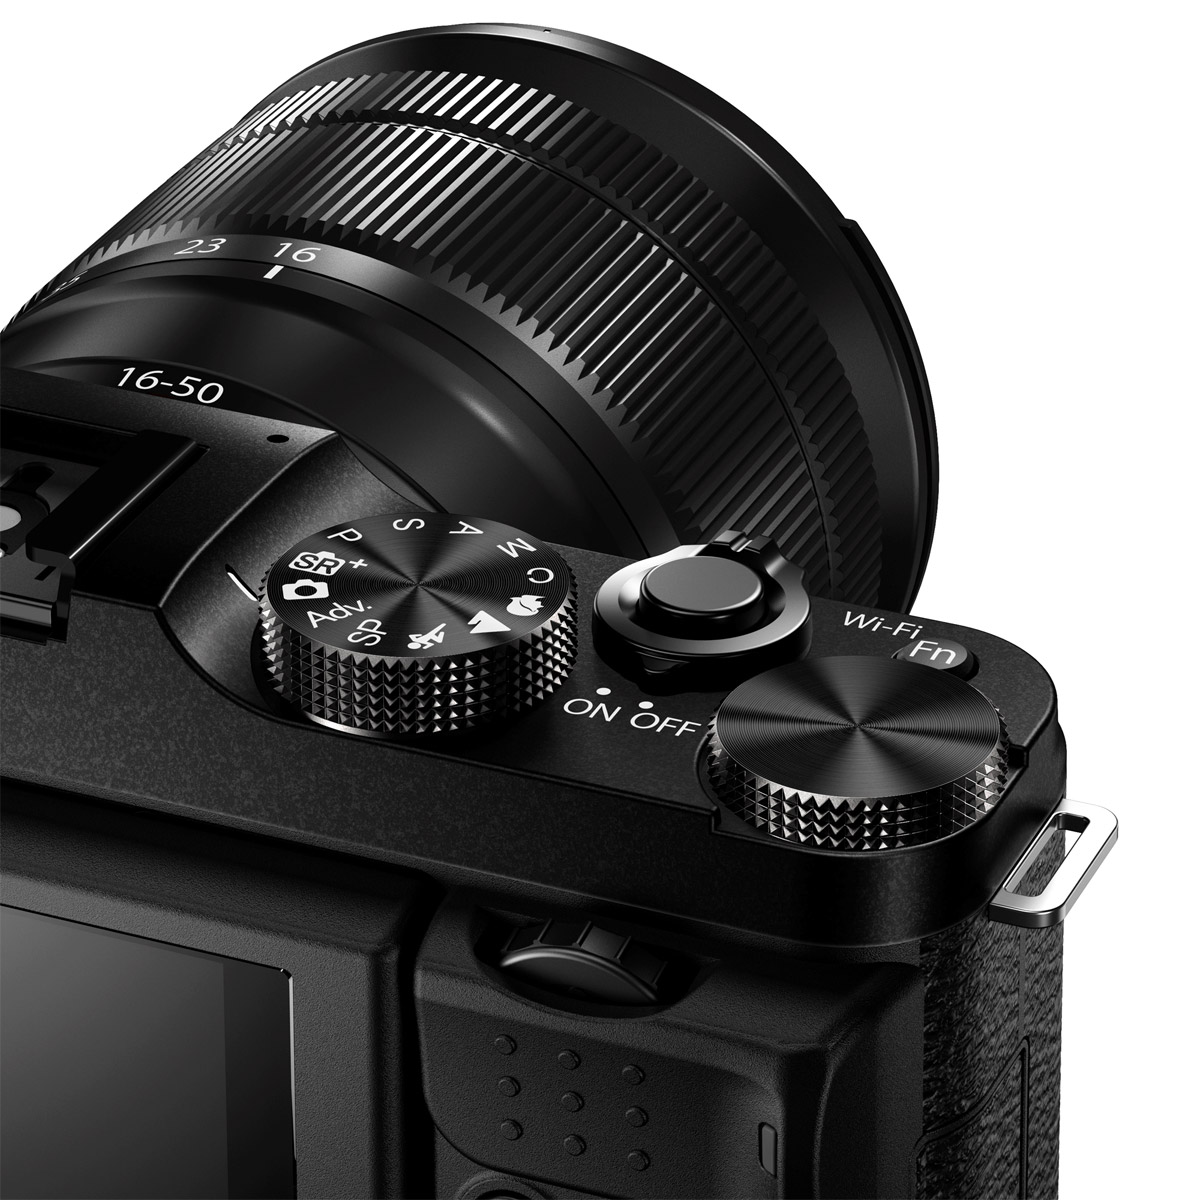 Fujifilm's Affordable New Mirrorless Camera With Wi-Fi • Camera News and Reviews